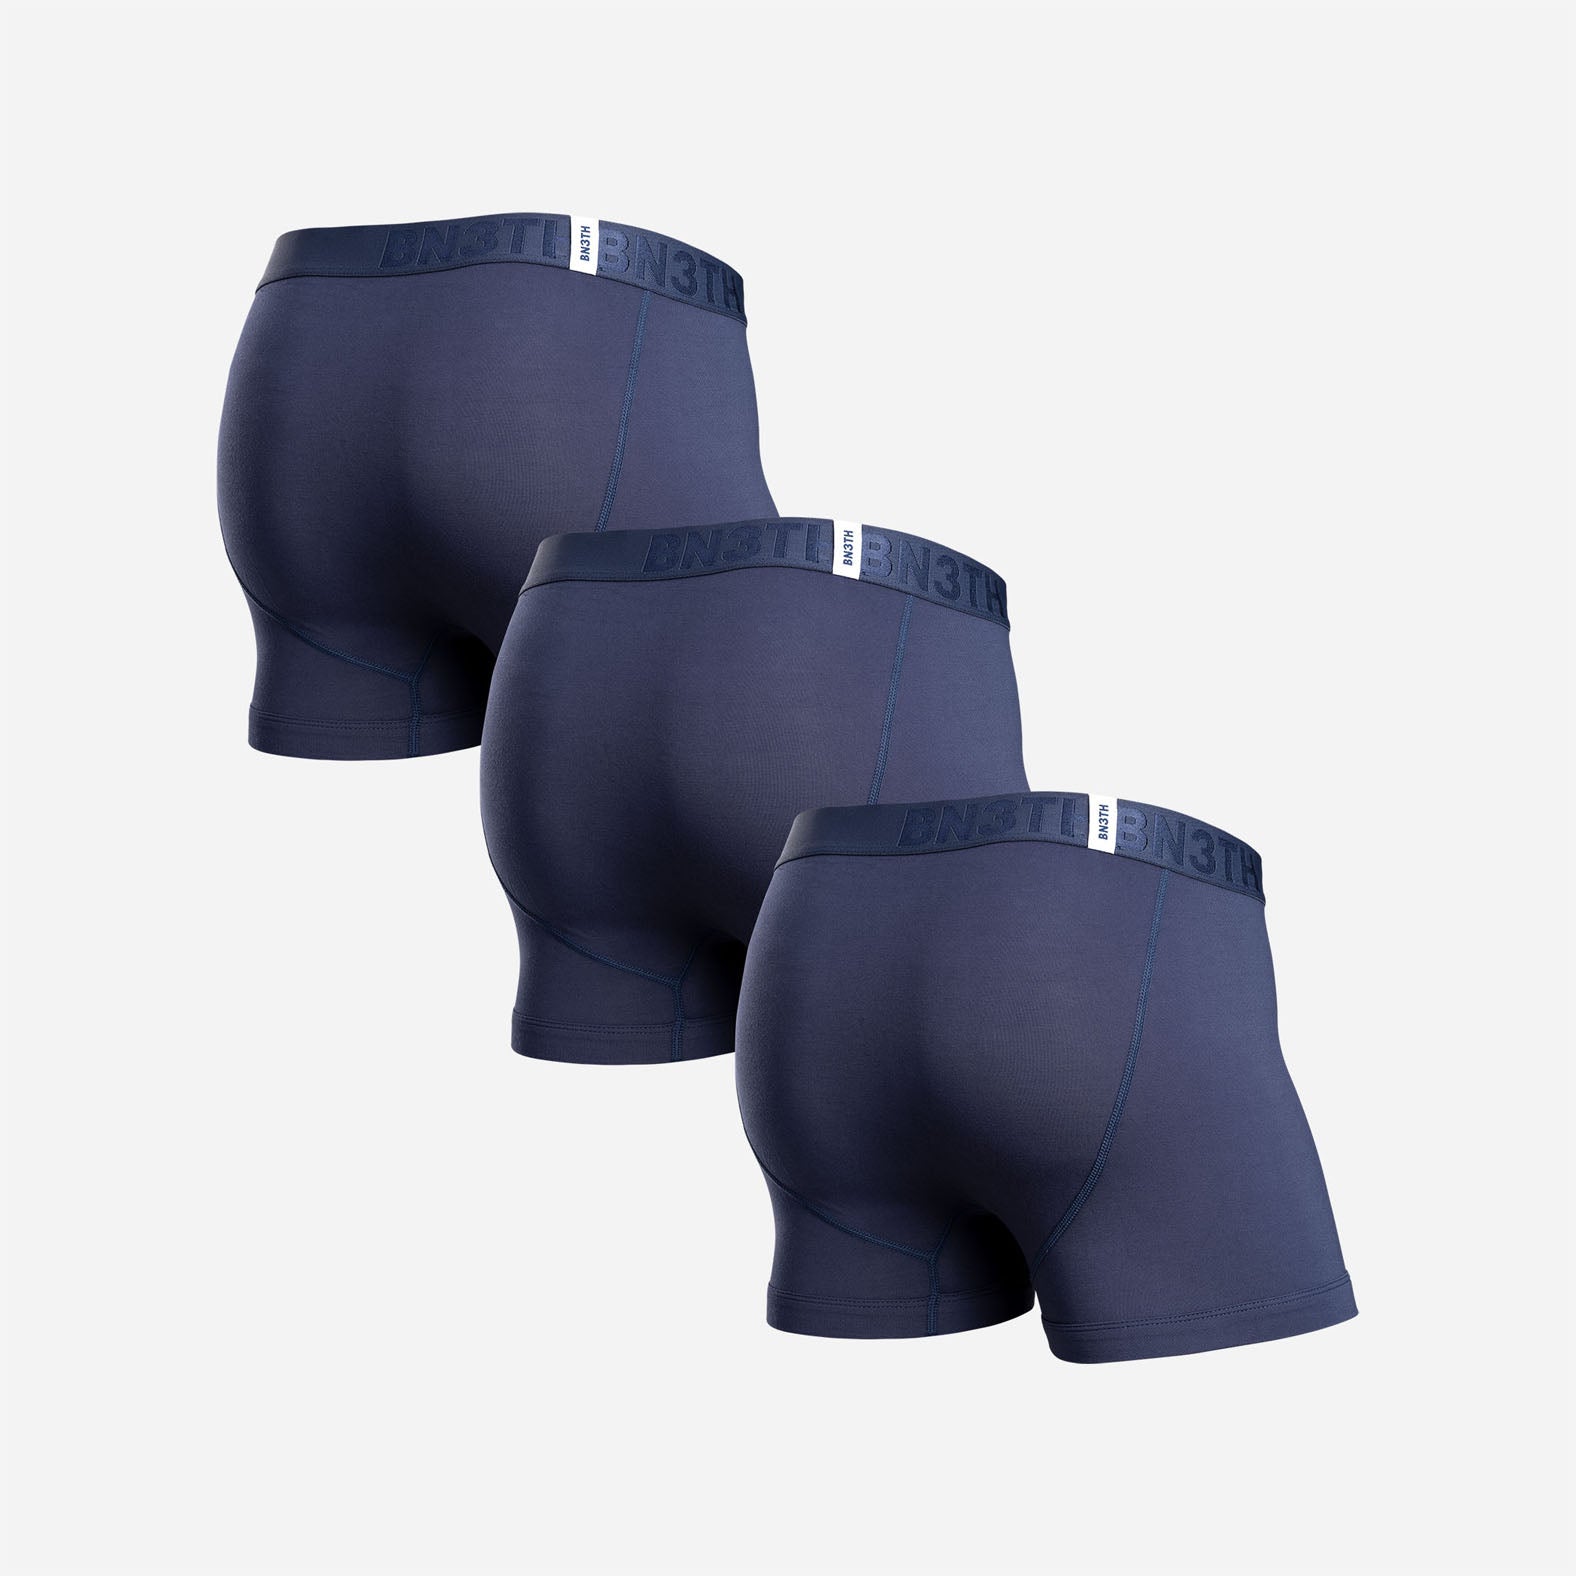 CLASSIC TRUNK: NAVY 3 PACK